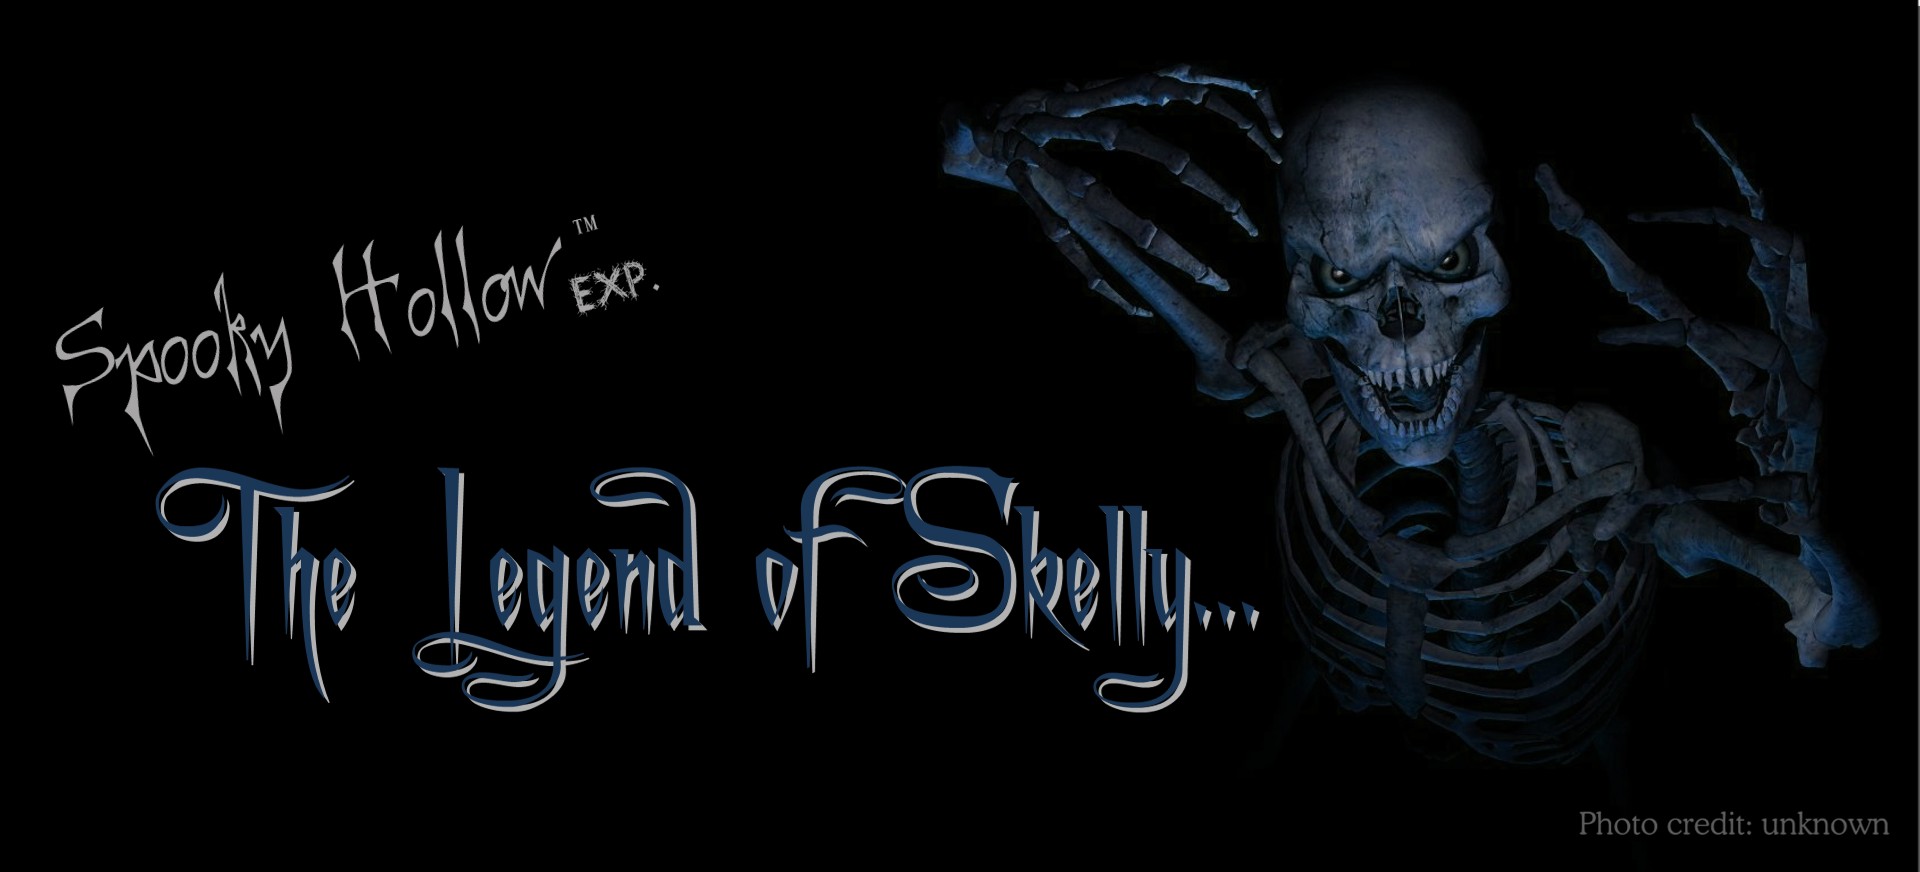 Spooky Hollow Experience The Legend of Skelly